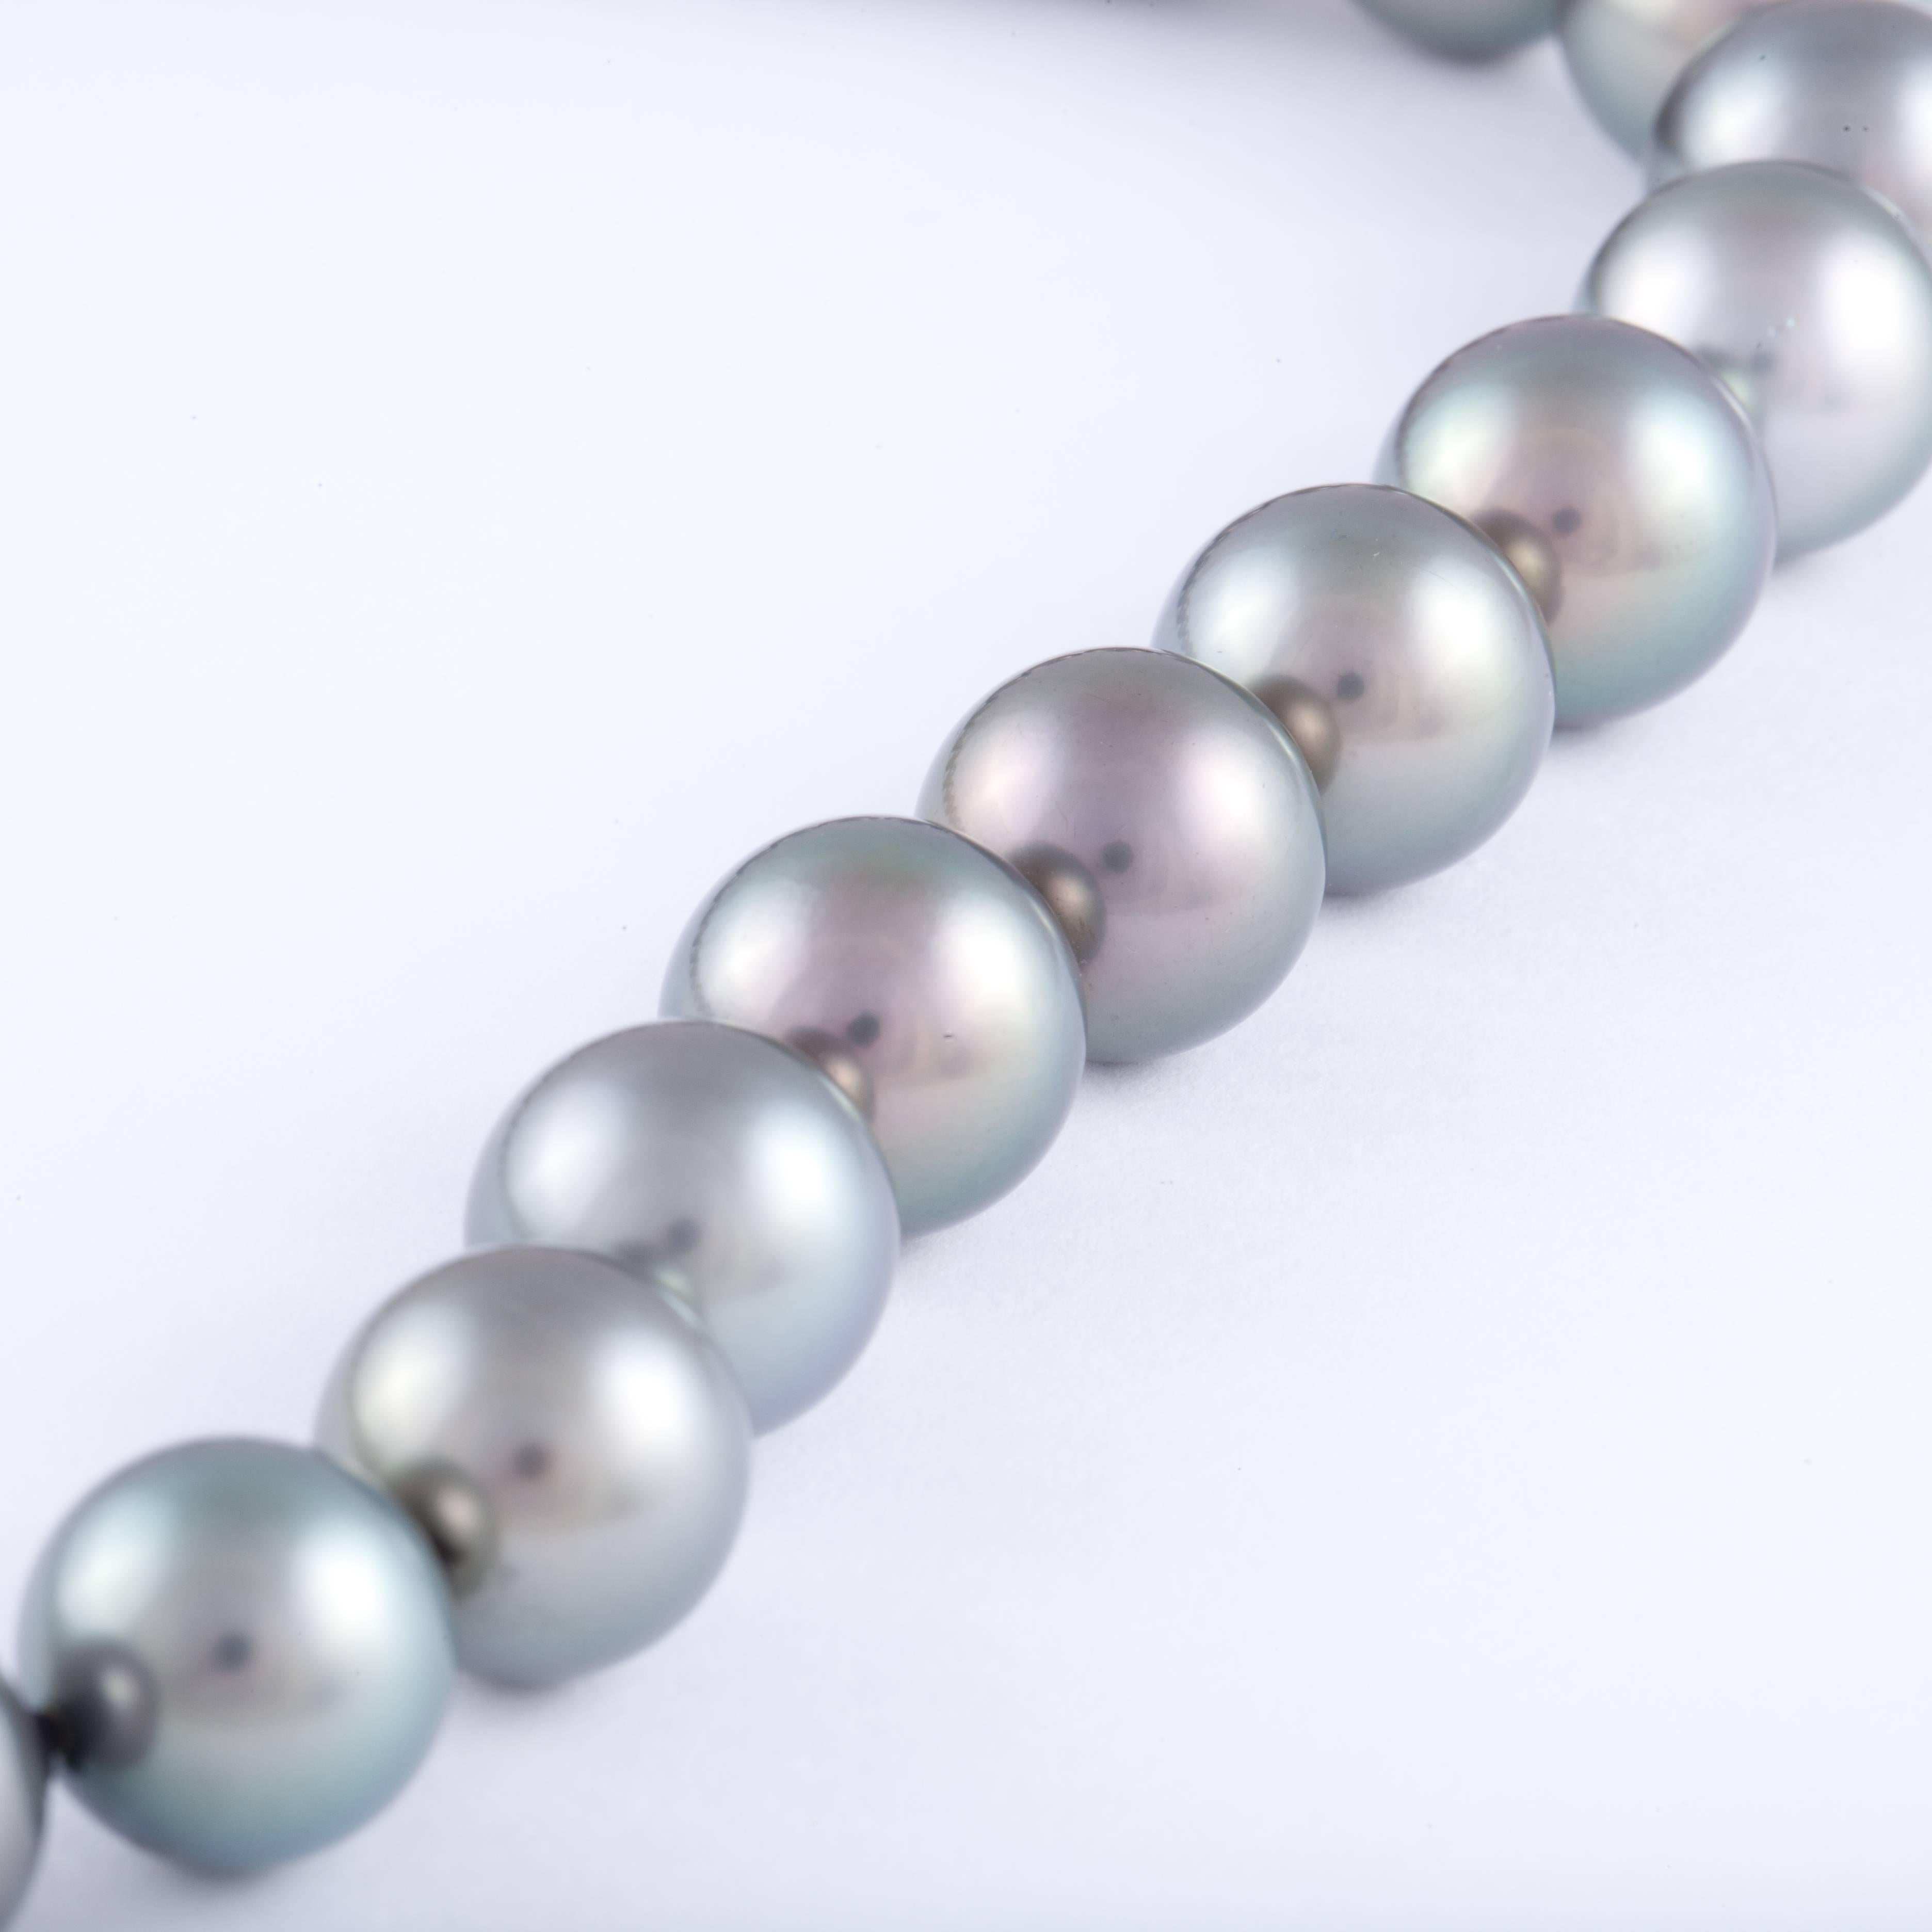 Tahitian pearl necklace, with dark gray pearls that measure 12-15.2mm.  The stand measures 18 inches in length with a ball clasp is 18K white gold encrusted with 1.44 carats of diamonds; F-H color and VS clarity.  